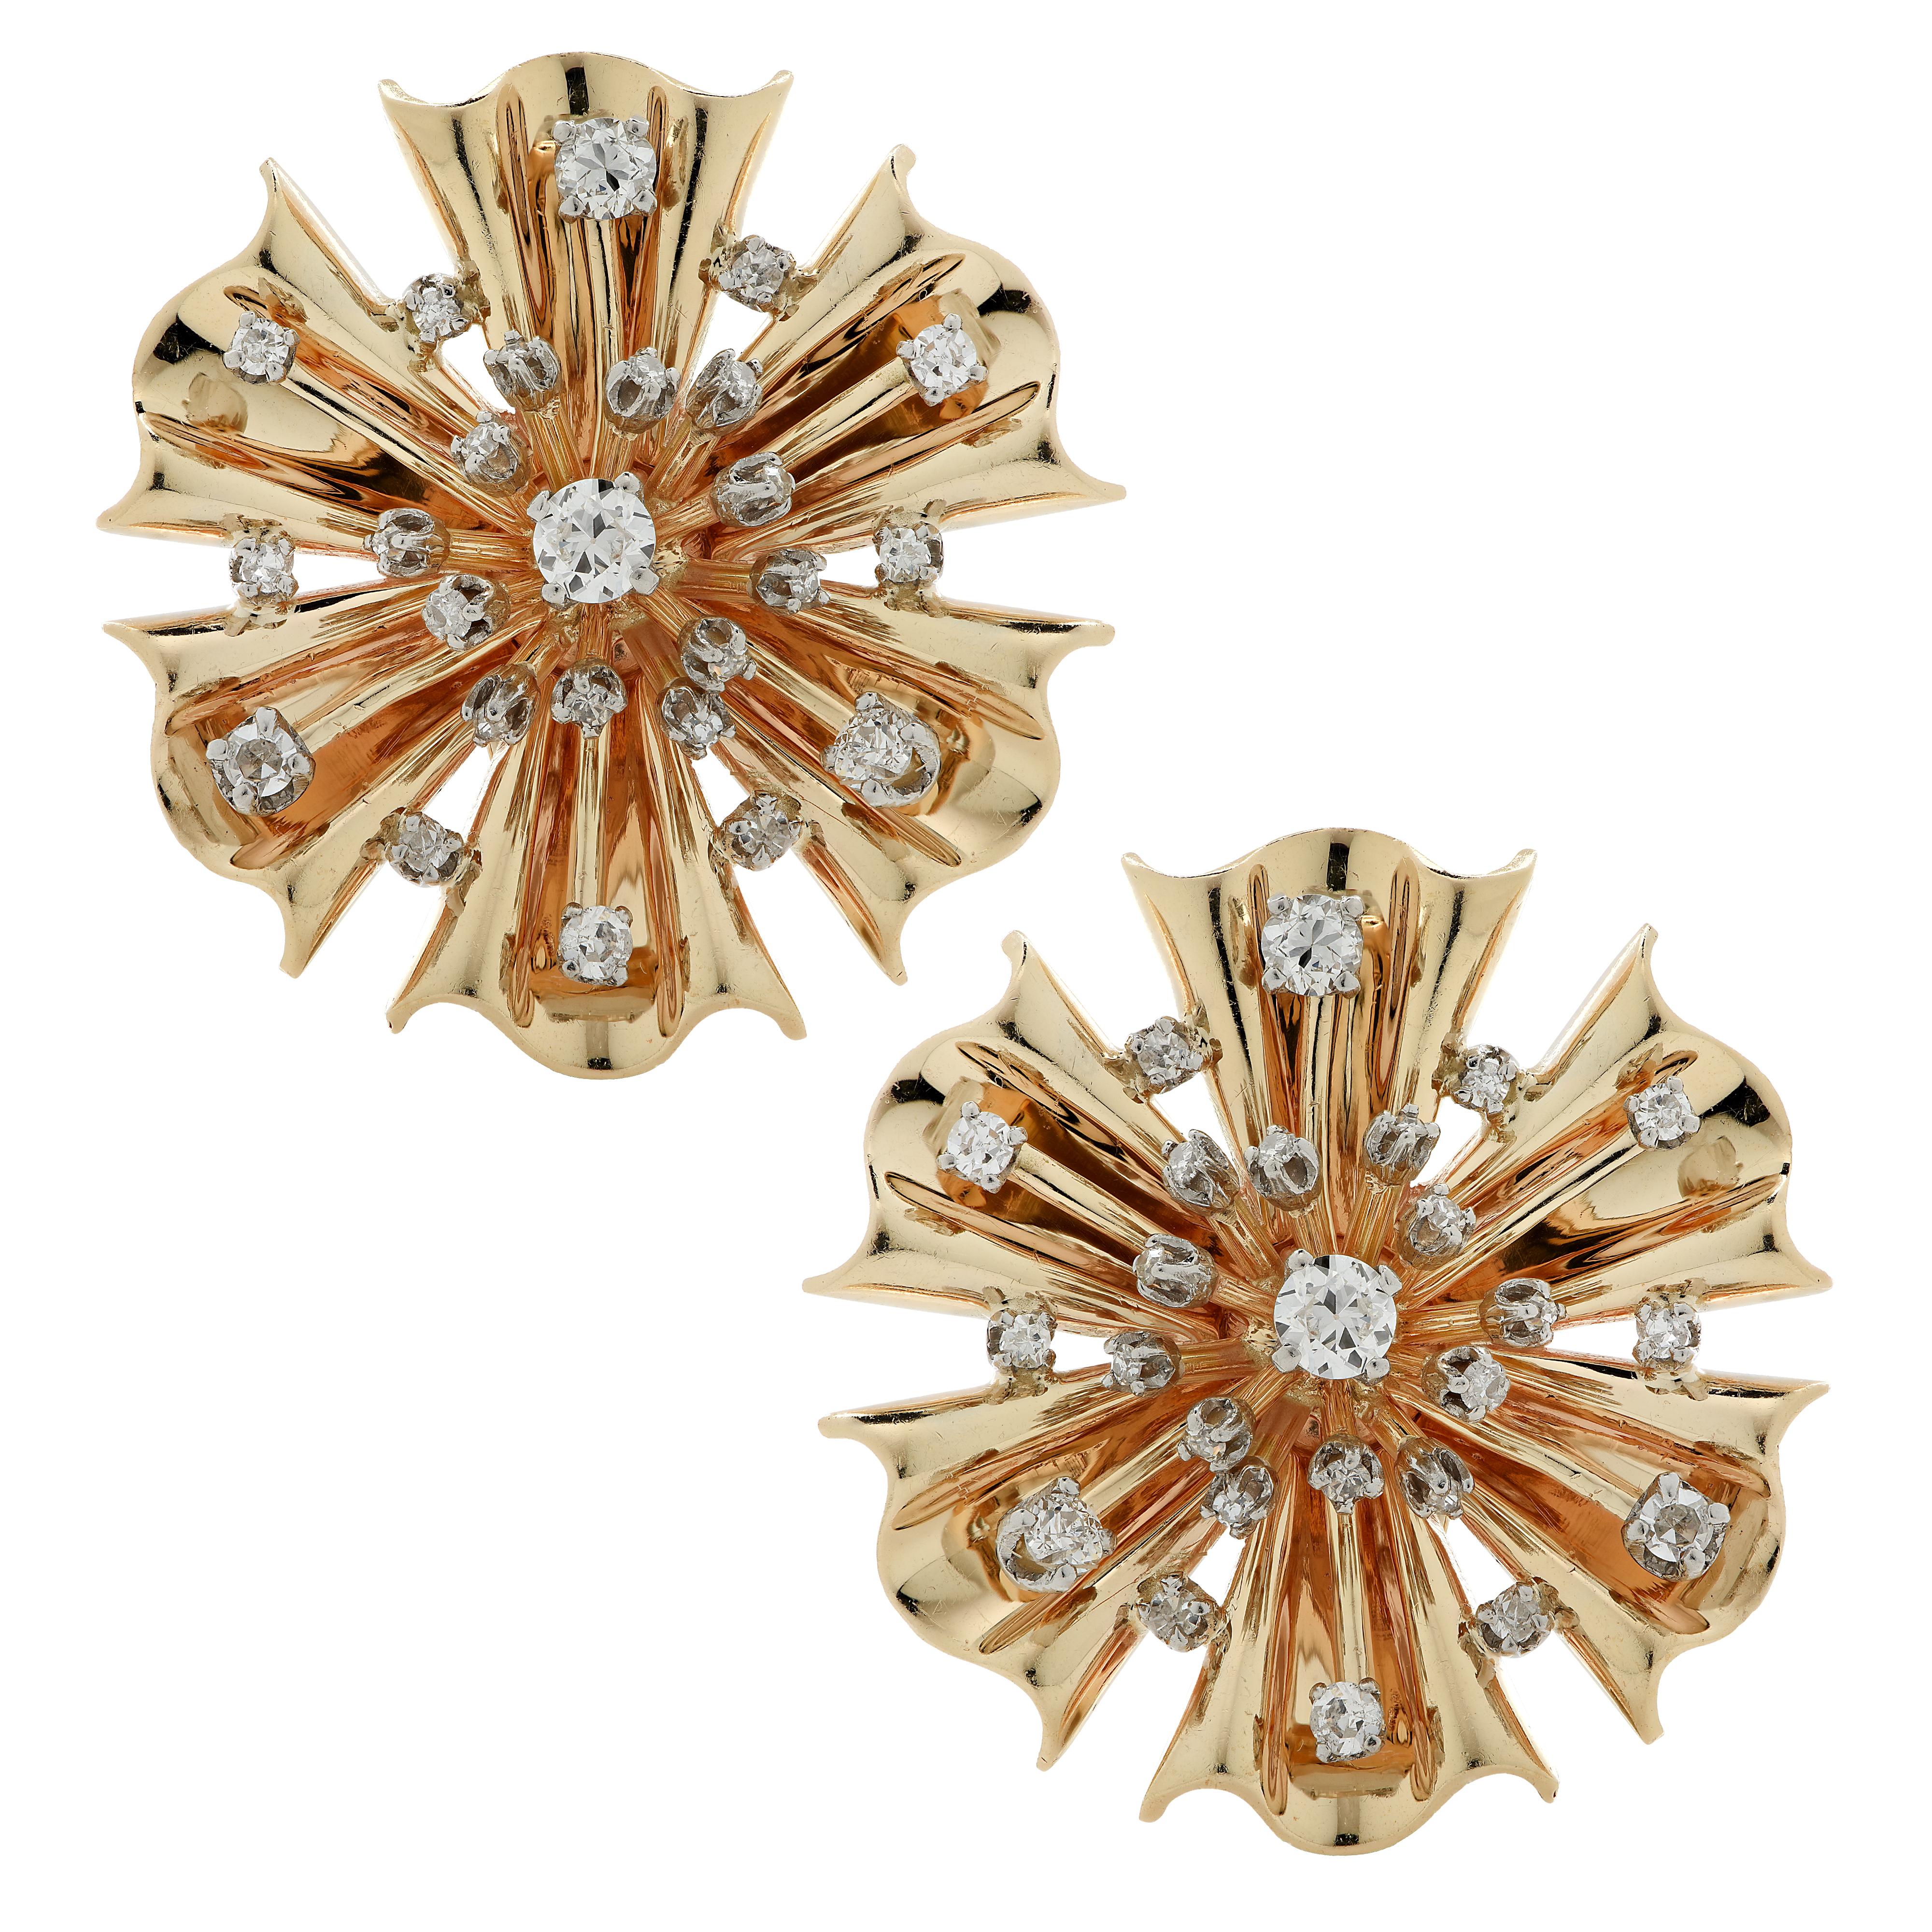 Stunning retro brooch pin/pendant and earring set crafted in yellow gold, featuring 80 old mine cut and Old European cut diamonds weighing approximately 2 carats total, J-K color, SI clarity. The gold is fluted and molded into flowers adorned with